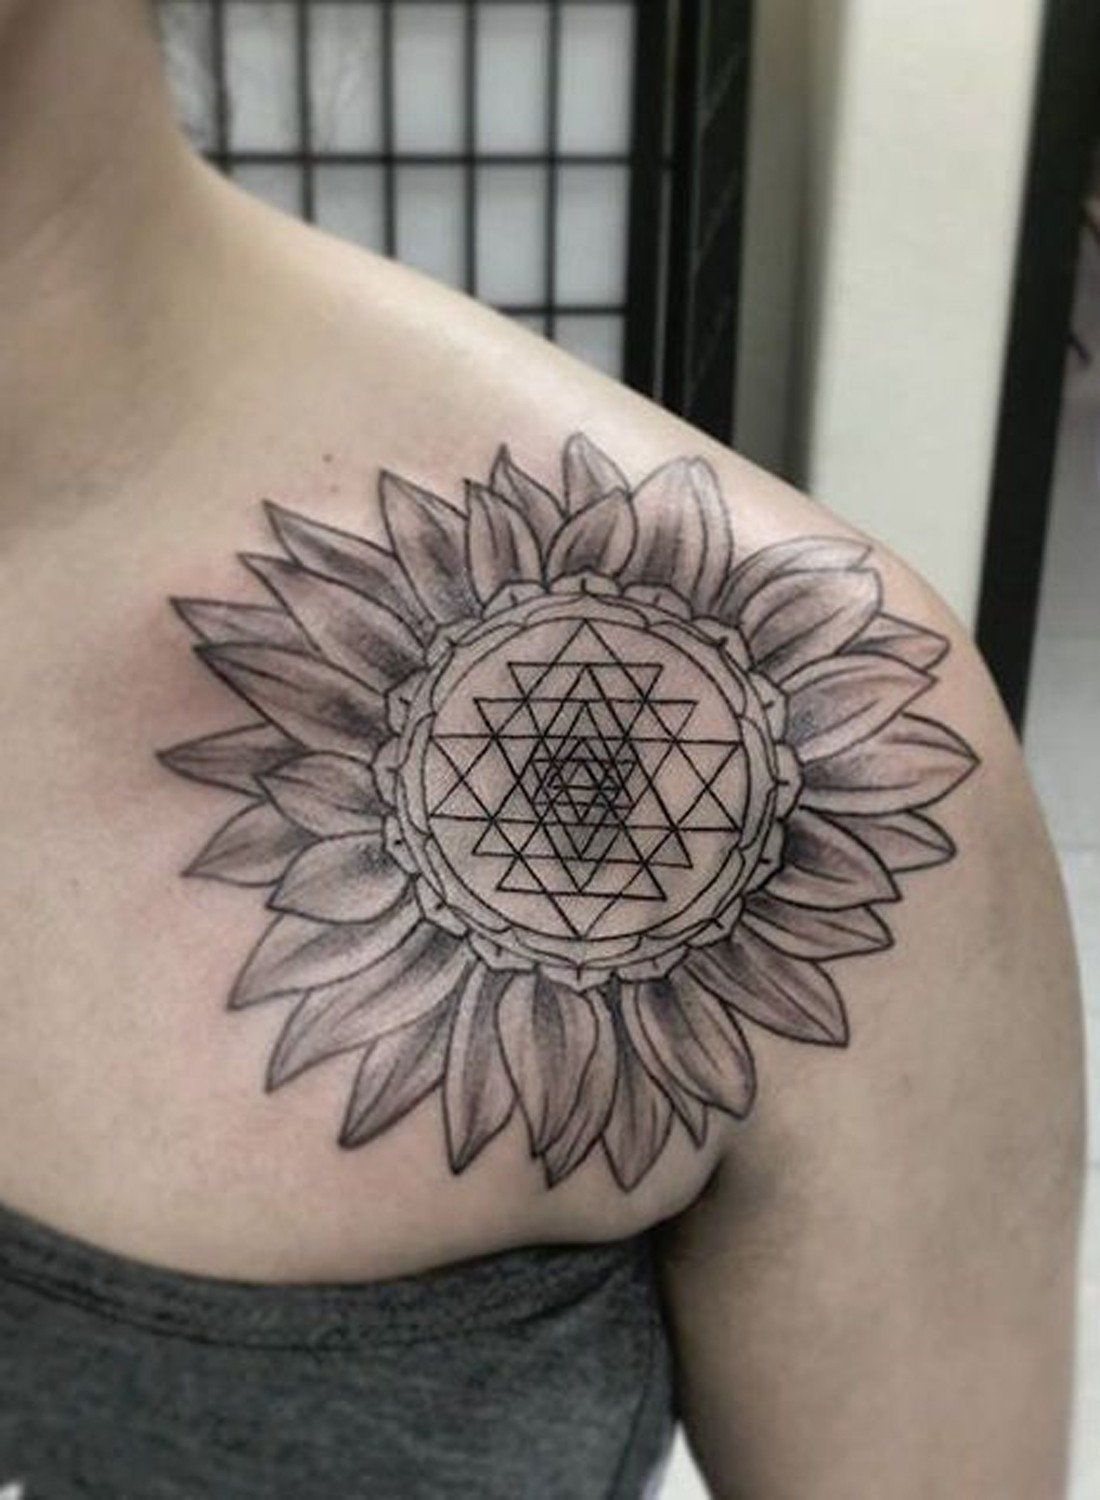 20 Of The Most Boujee Sunflower Tattoo Ideas Tats Sunflower within proportions 1100 X 1500